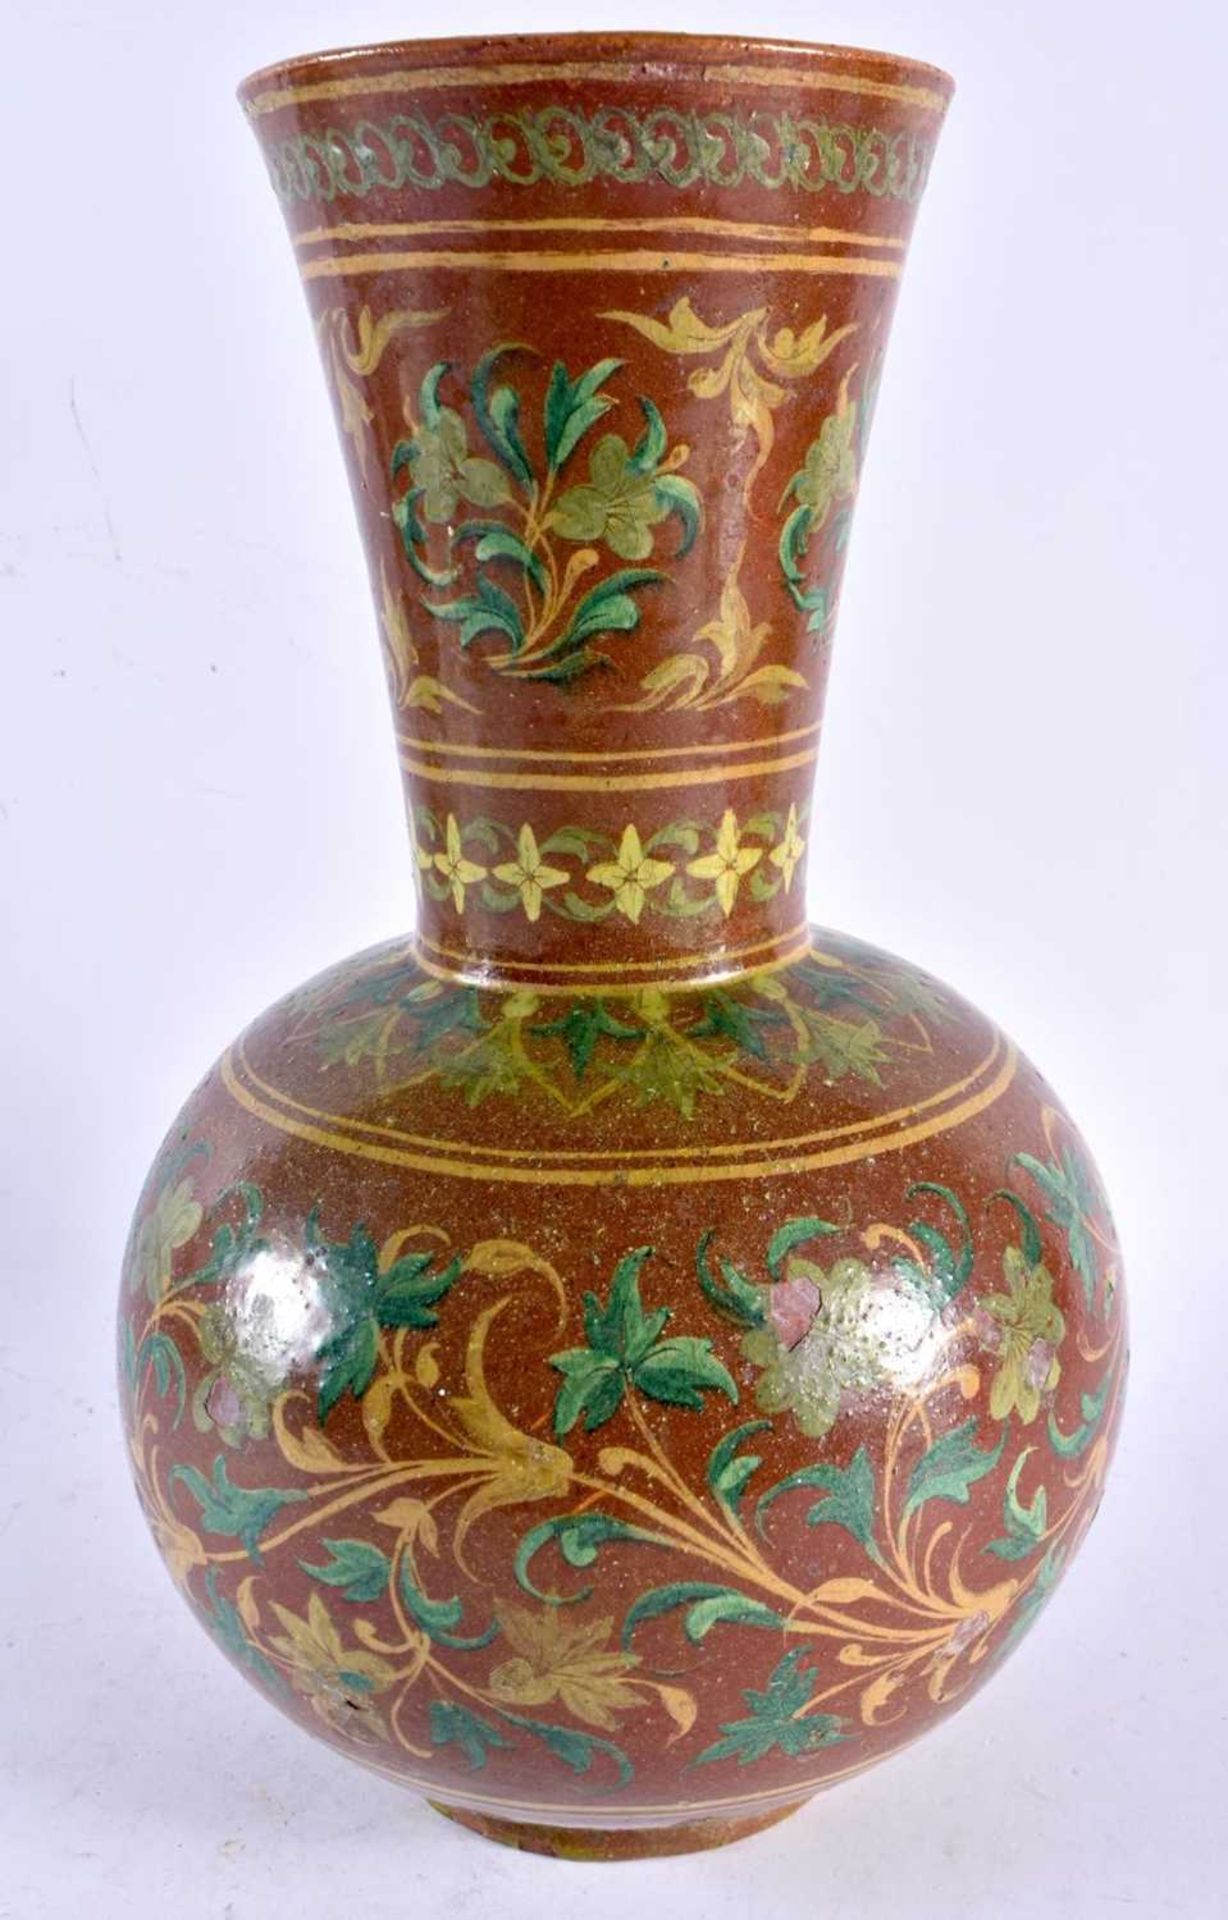 A FINE 19TH CENTURY MIDDLE EASTERN ISLAMIC INDIAN POTTERY VASE painted with stylised flowers in - Image 2 of 5